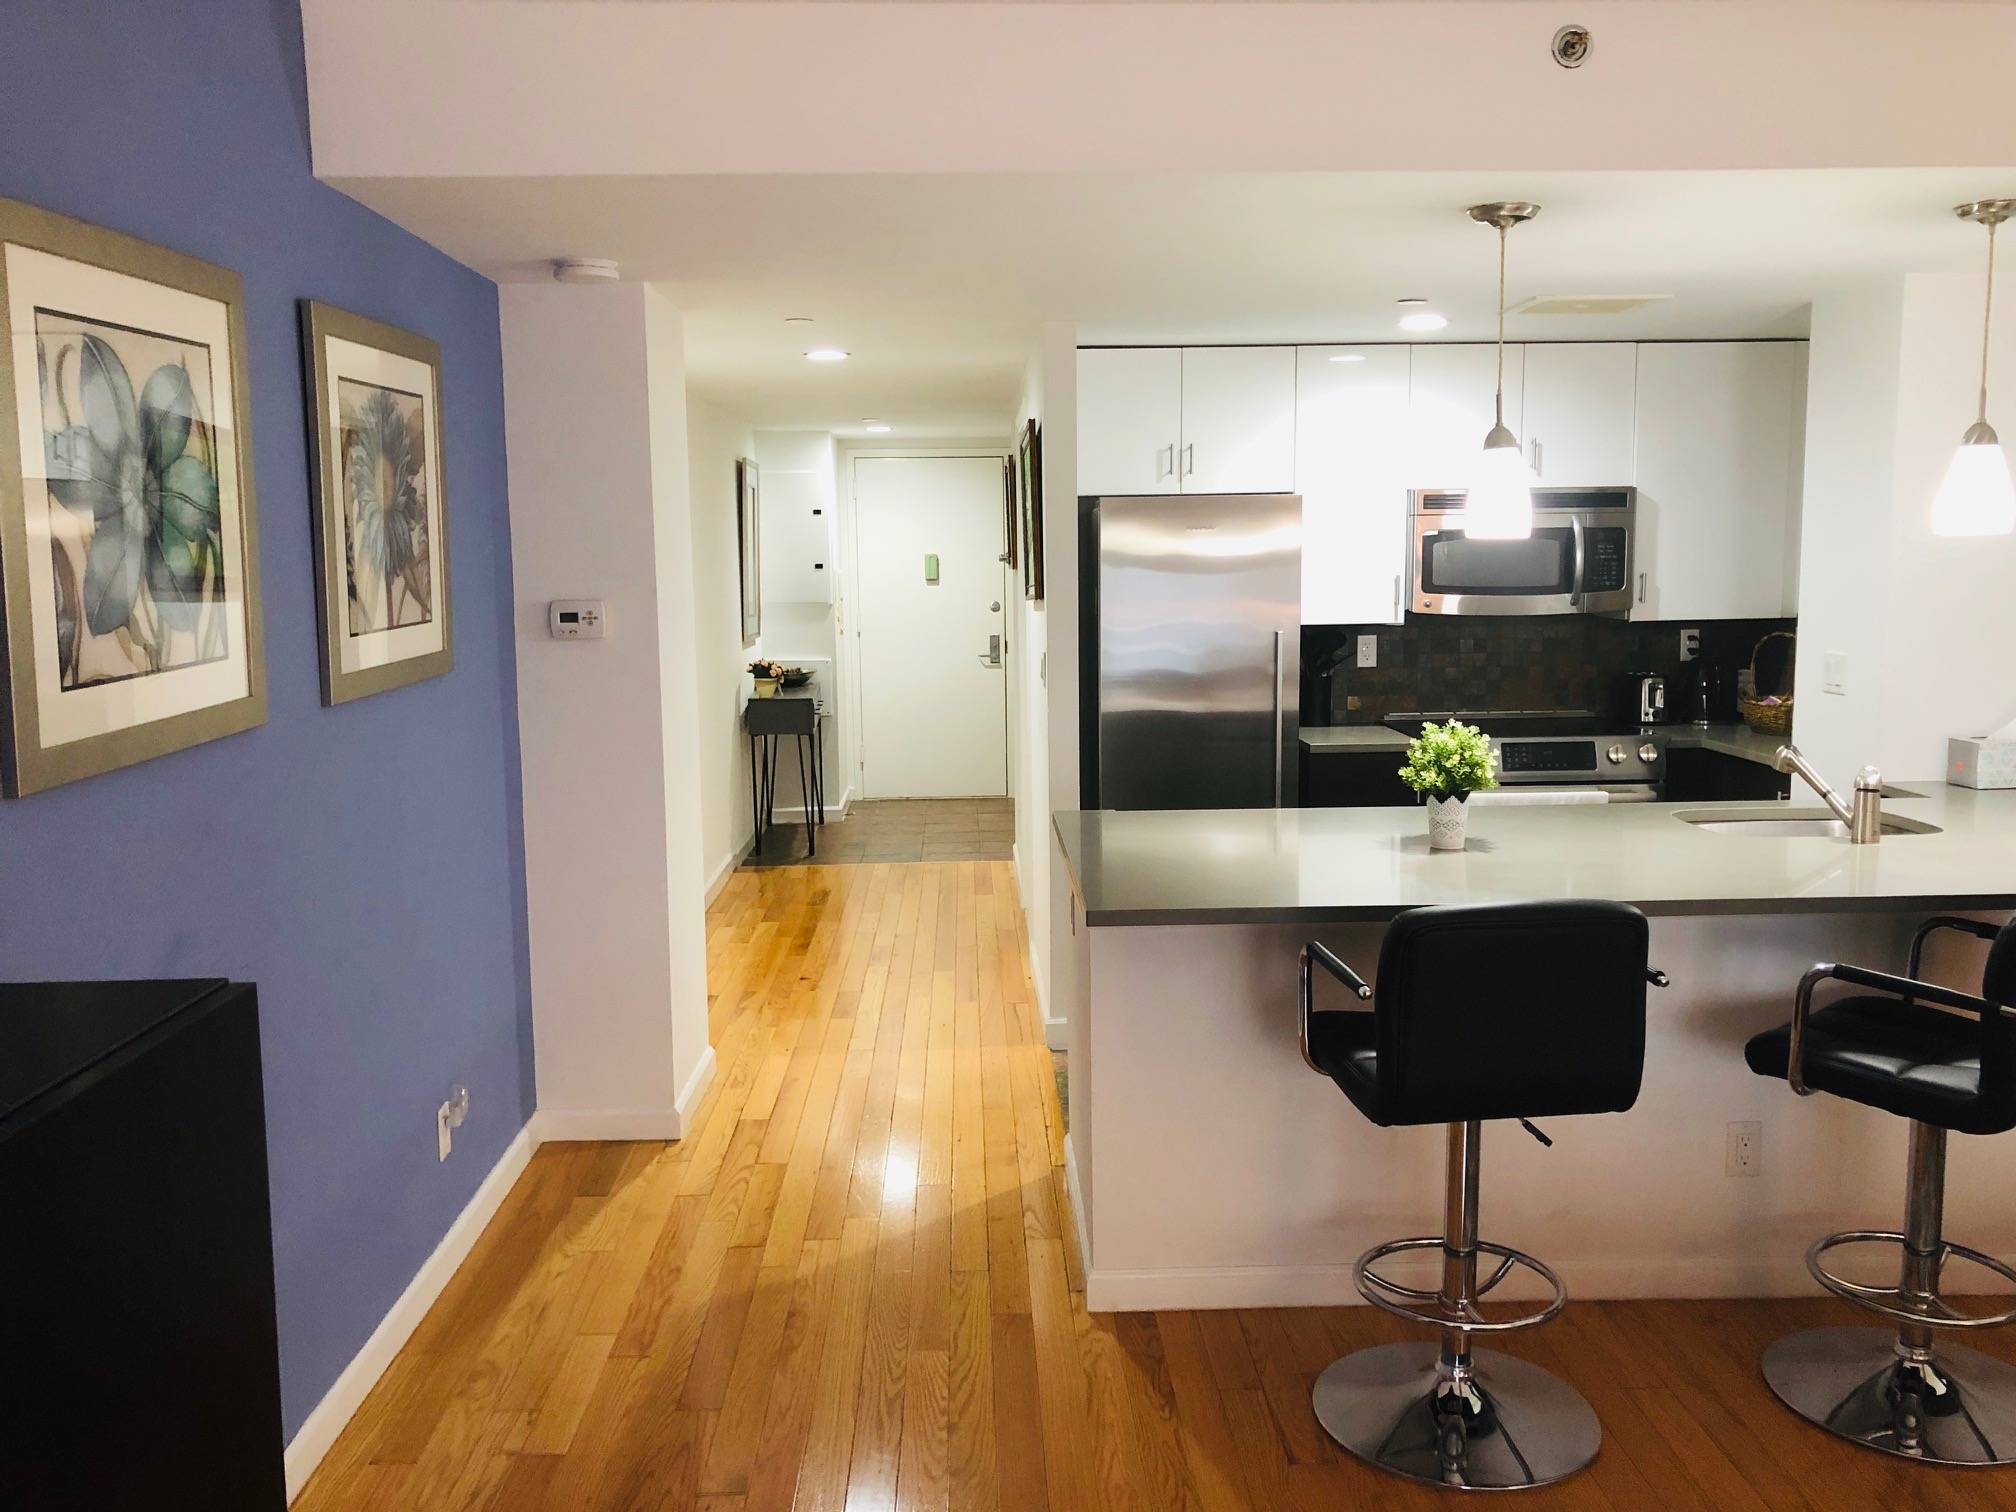 Spectacular Studio Apartment for Rent by NYU - Furnished or Unfurnished - New to Market! Students, International and Guarantors Welcomed!